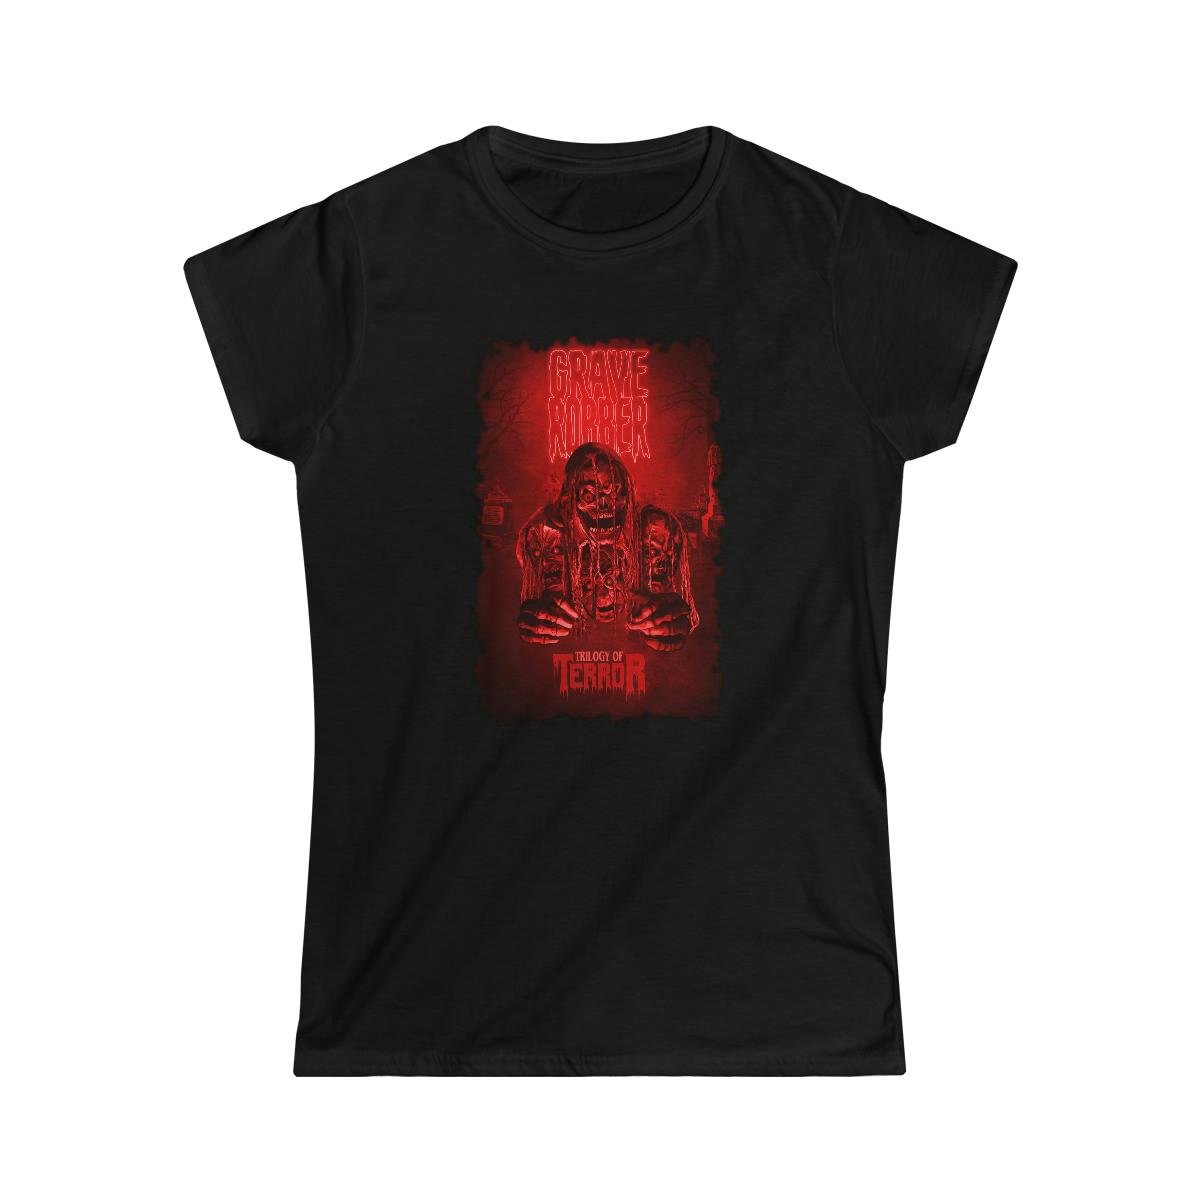 Grave Robber Trilogy of Terror (Limited Edition Red) Women’s Short Sleeve Tshirt